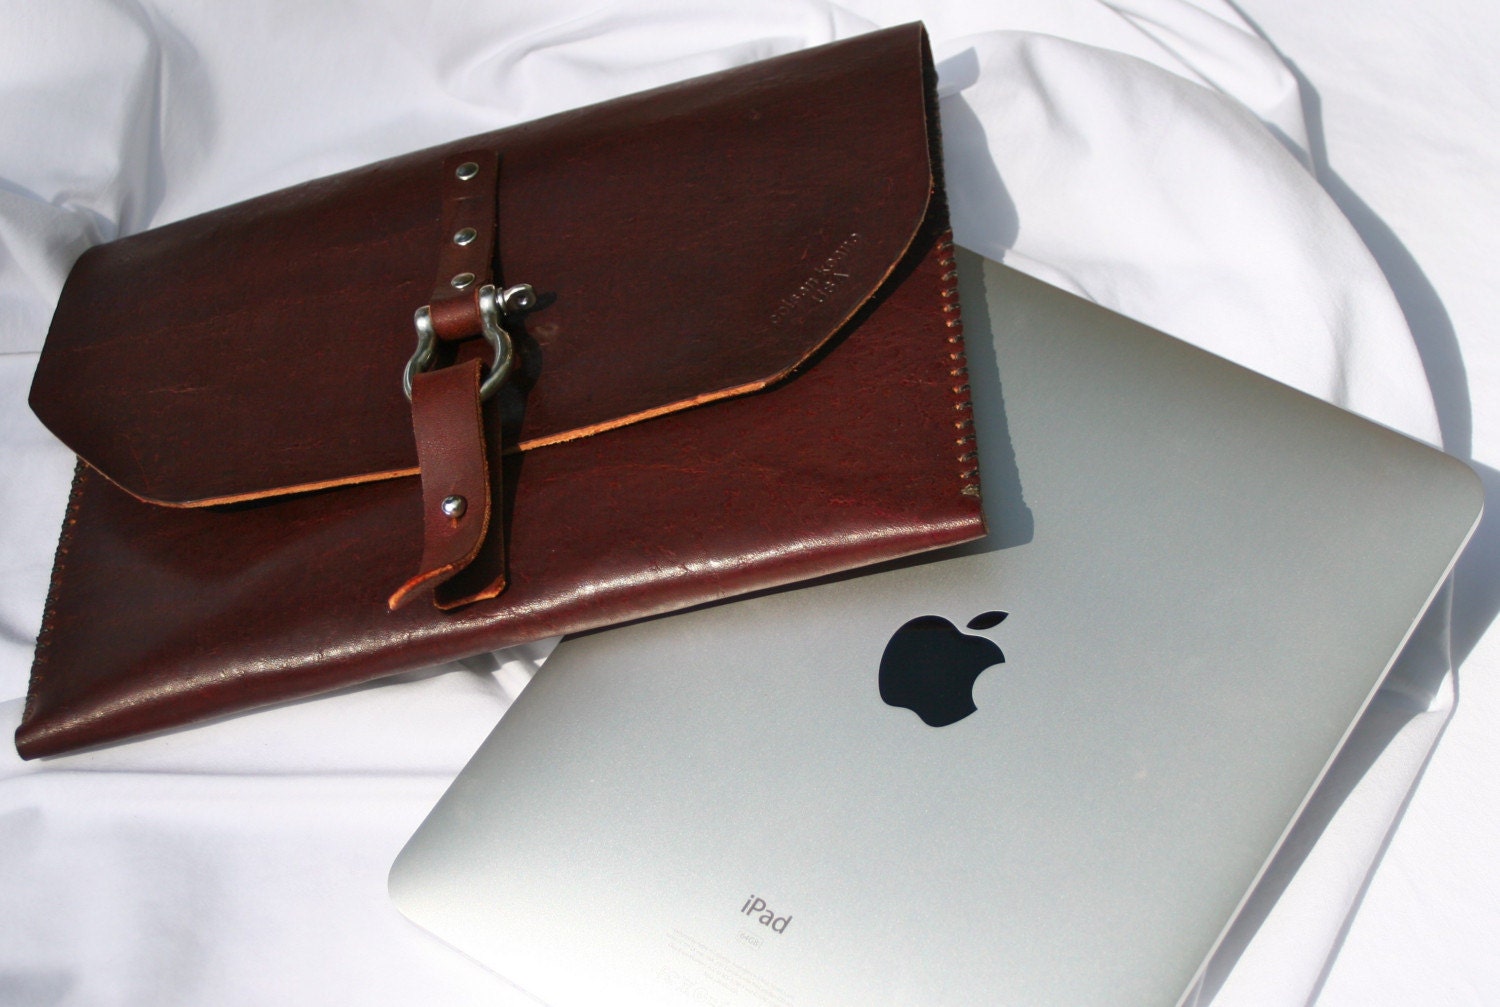 THE AGED APPLE- iPad Thick Dark Brown Latigo 6 oz. Leather Sheath / Cover / Case / Sleeve- With Flap and Buckle